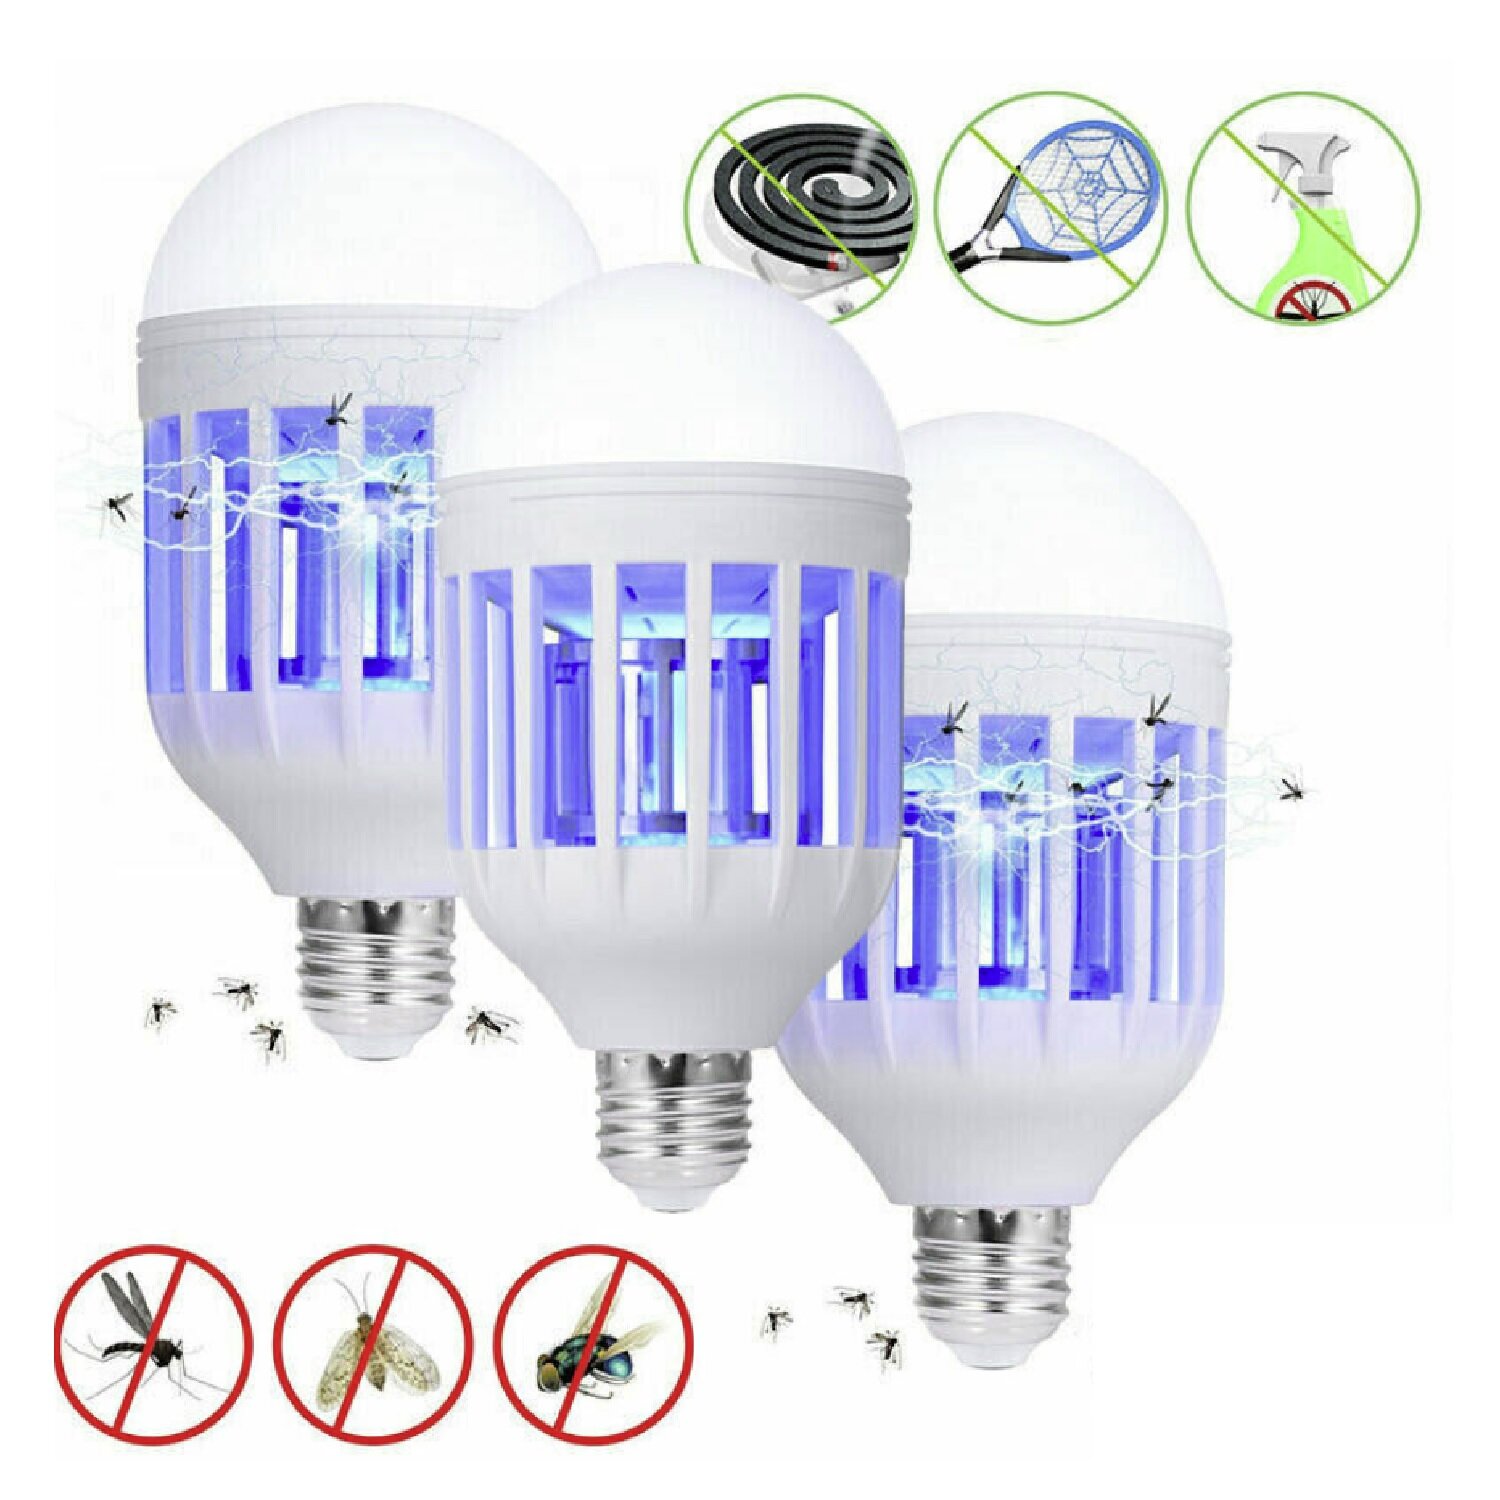 1//2x LED Light Bulb Bug Mosquito Fly Insect Killer Zapper Home Indoor Bulb Lamp